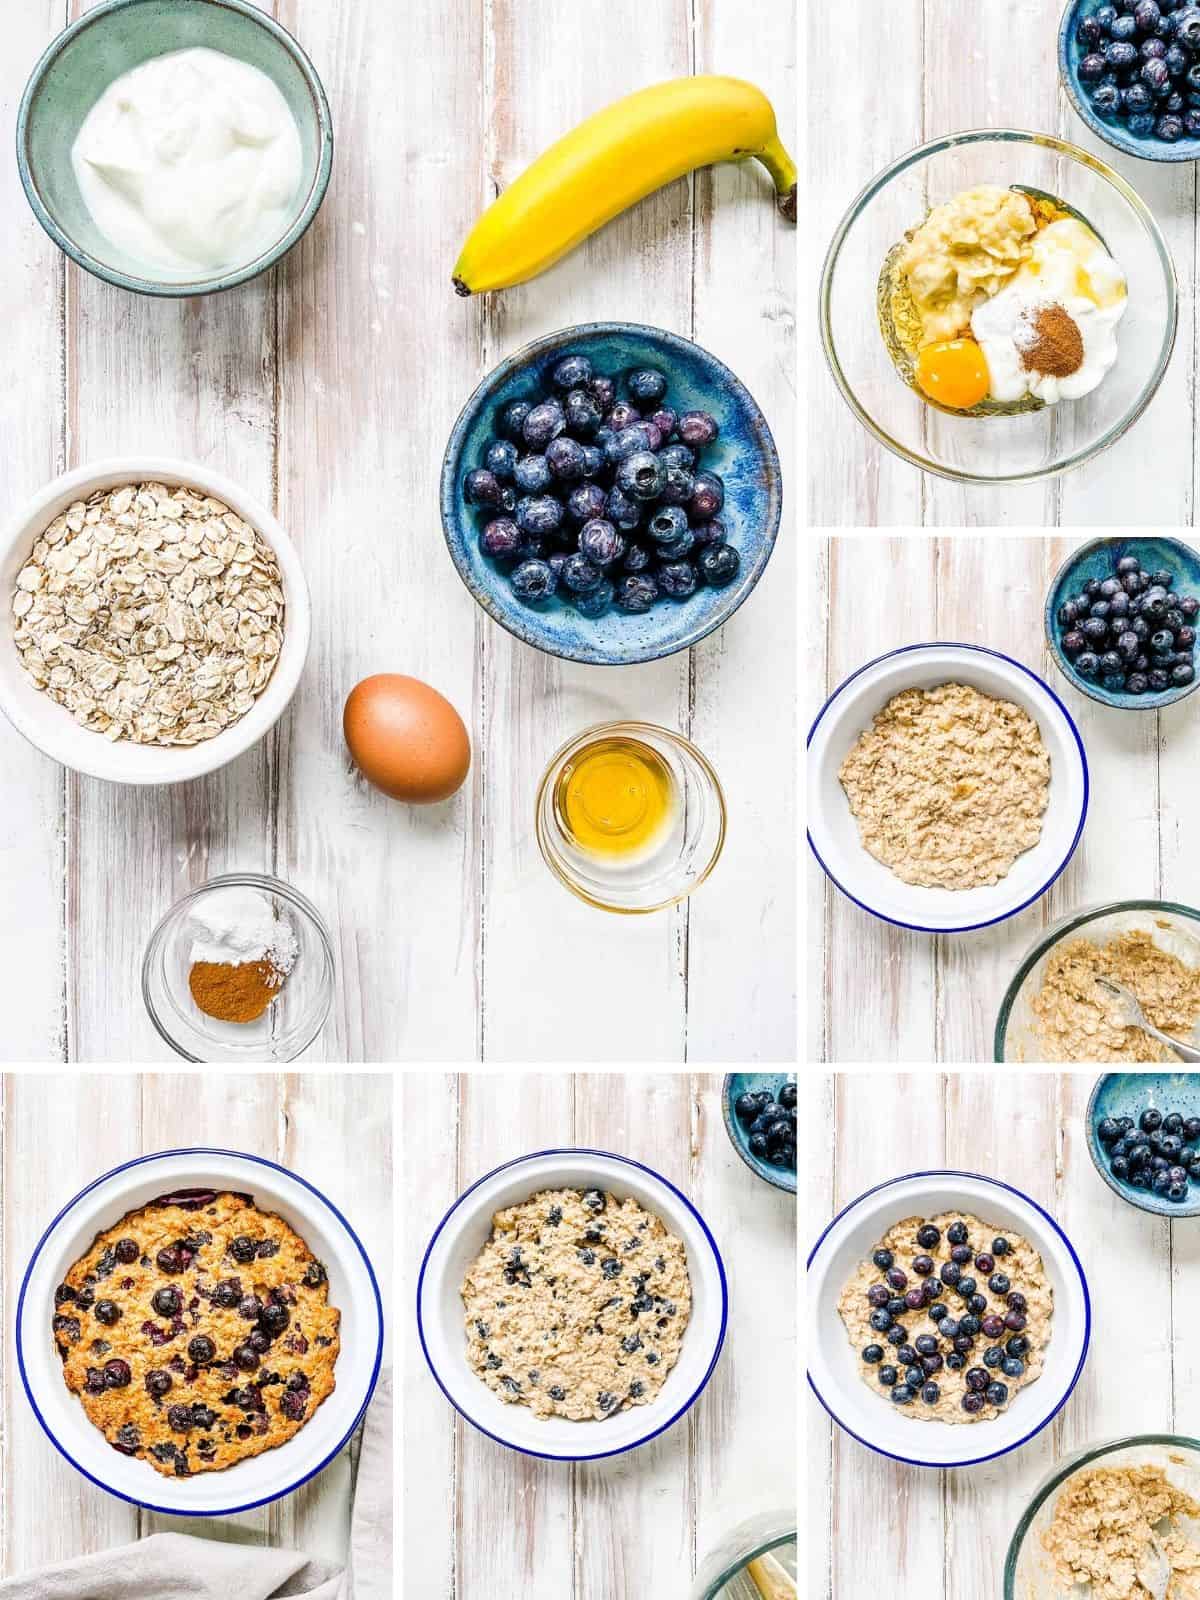 Photos showing how to make low calorie baked oatmeal.